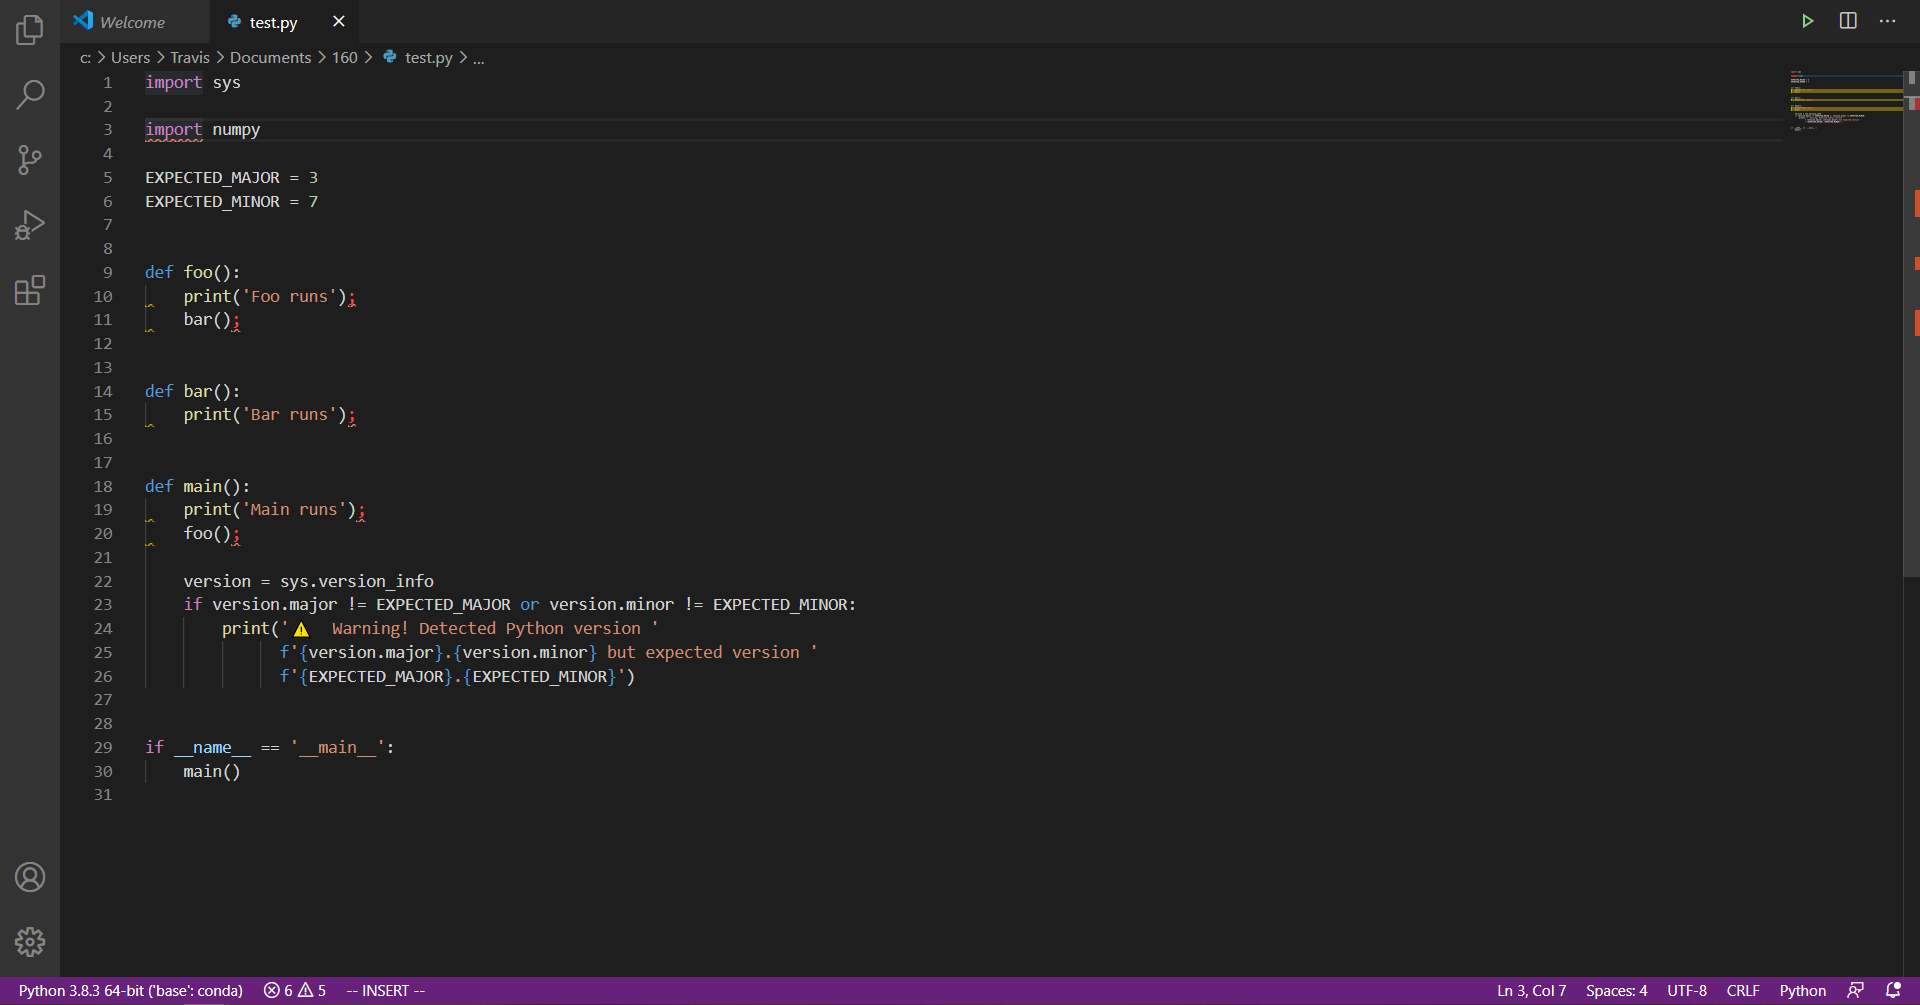 Sample picture of what you will see once the code has been opened in vscode